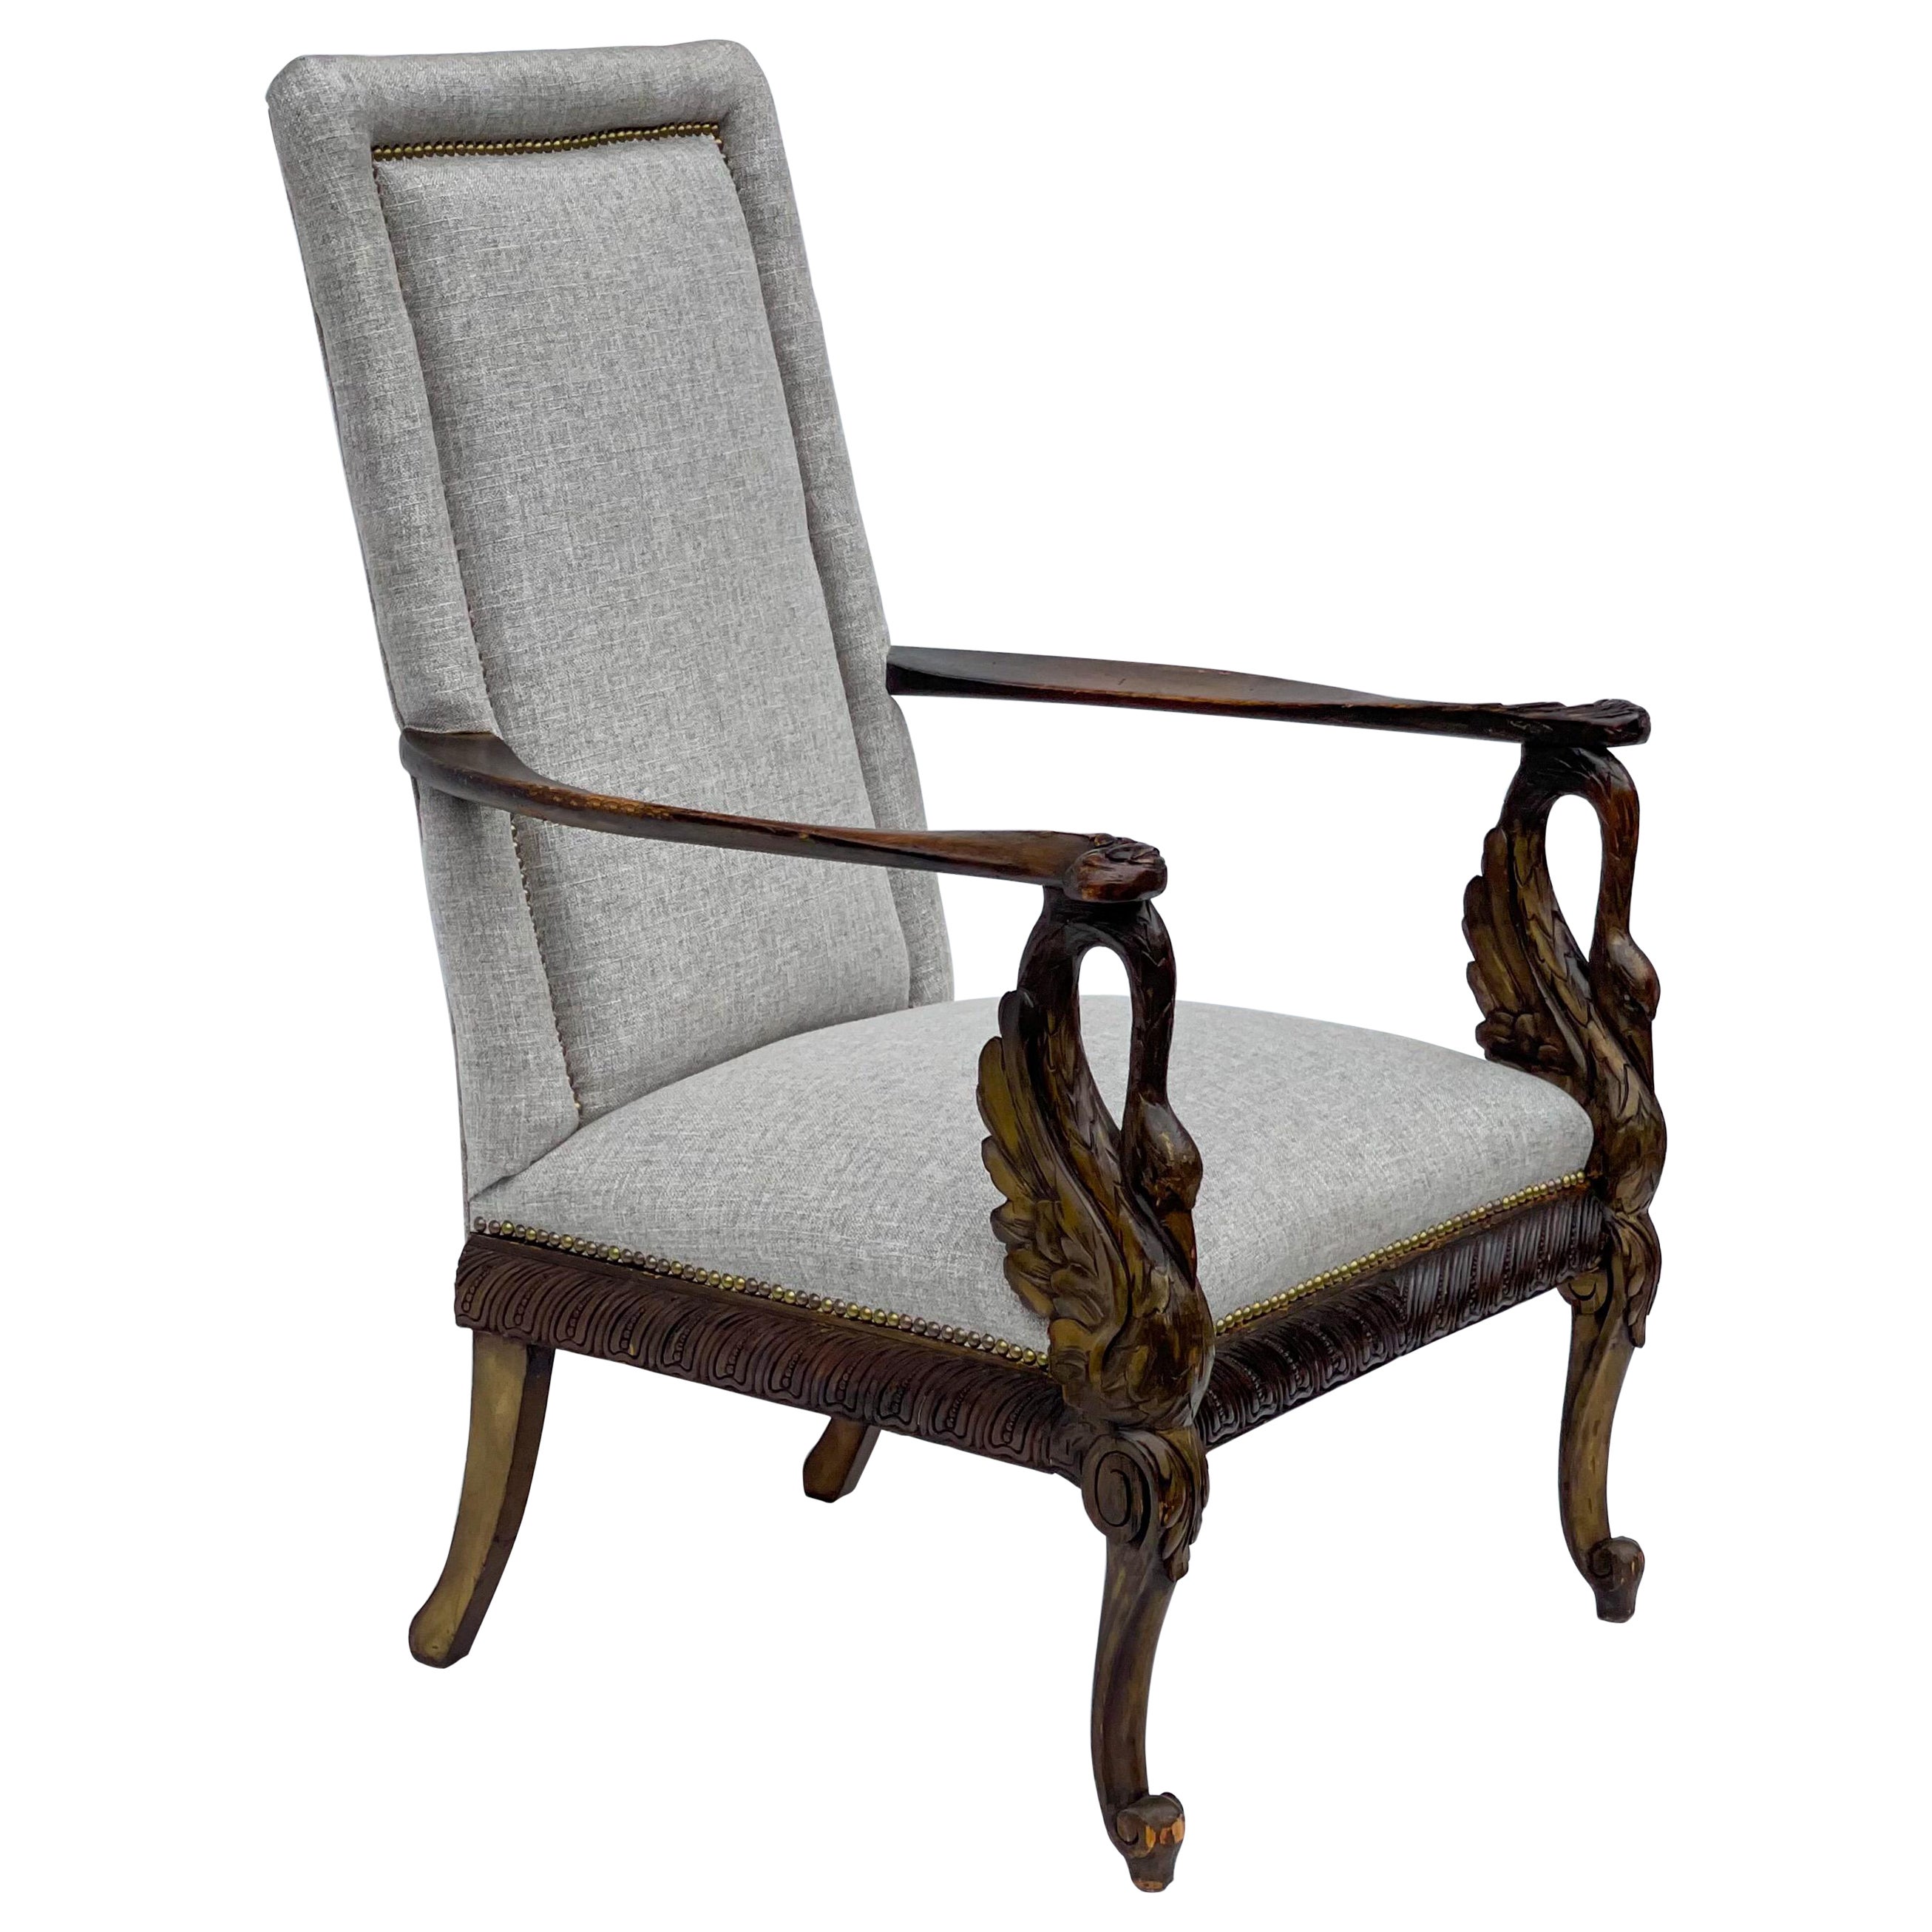 19th-C. Italian Neo-Classical Style Carved Walnut Arm Chair with Swan Form Arms